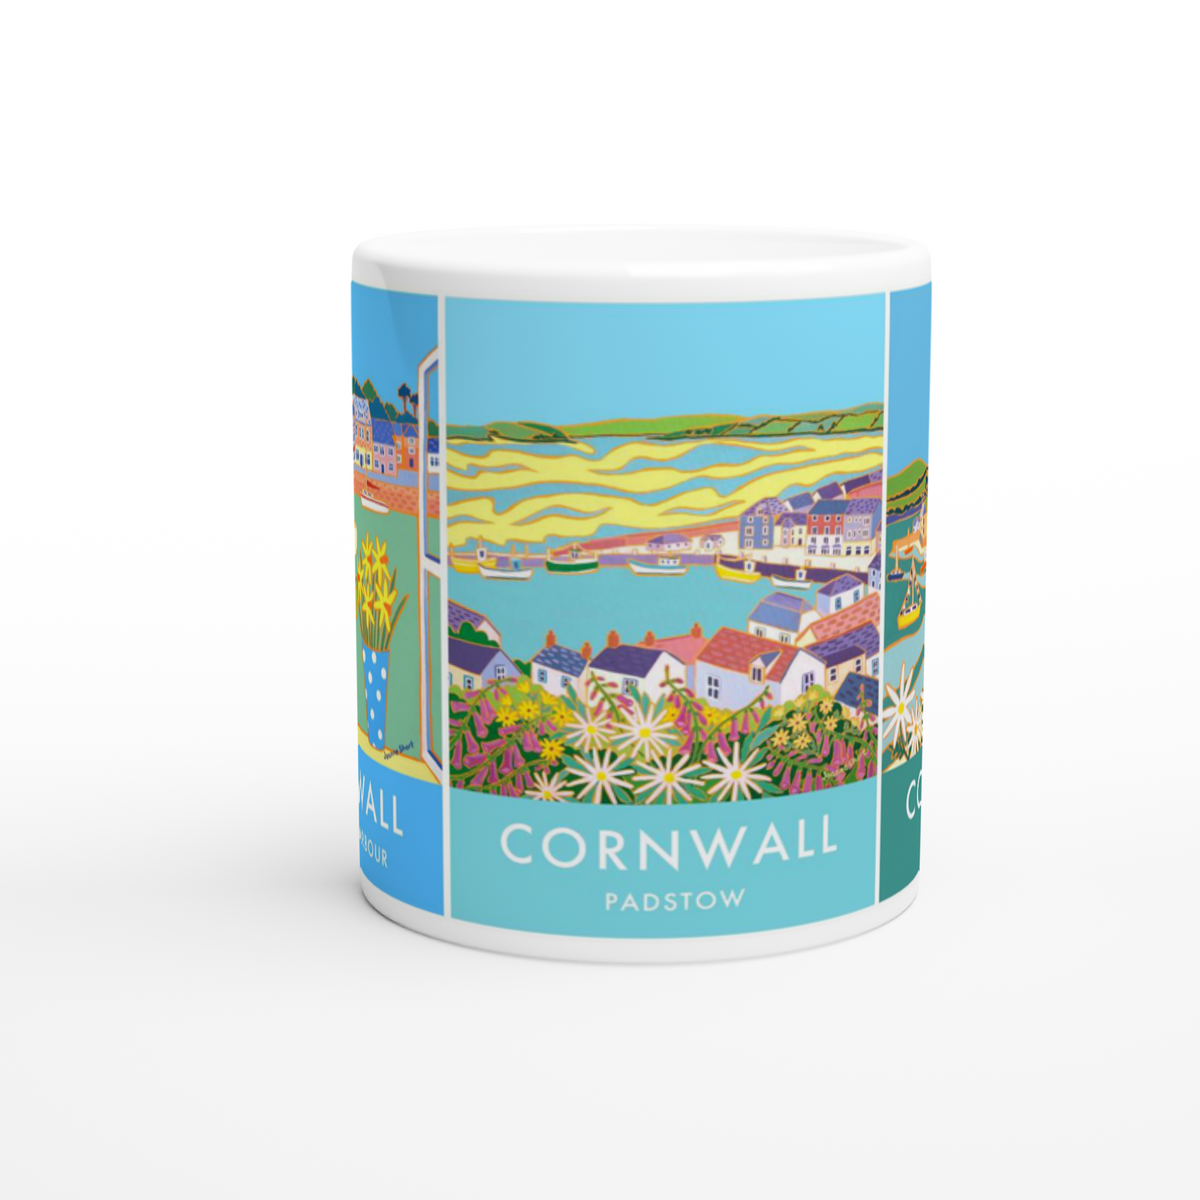 Joanne Short Ceramic Cornish Art Mug featuring Padstow Harbour, Padstow and Rock in Cornwall